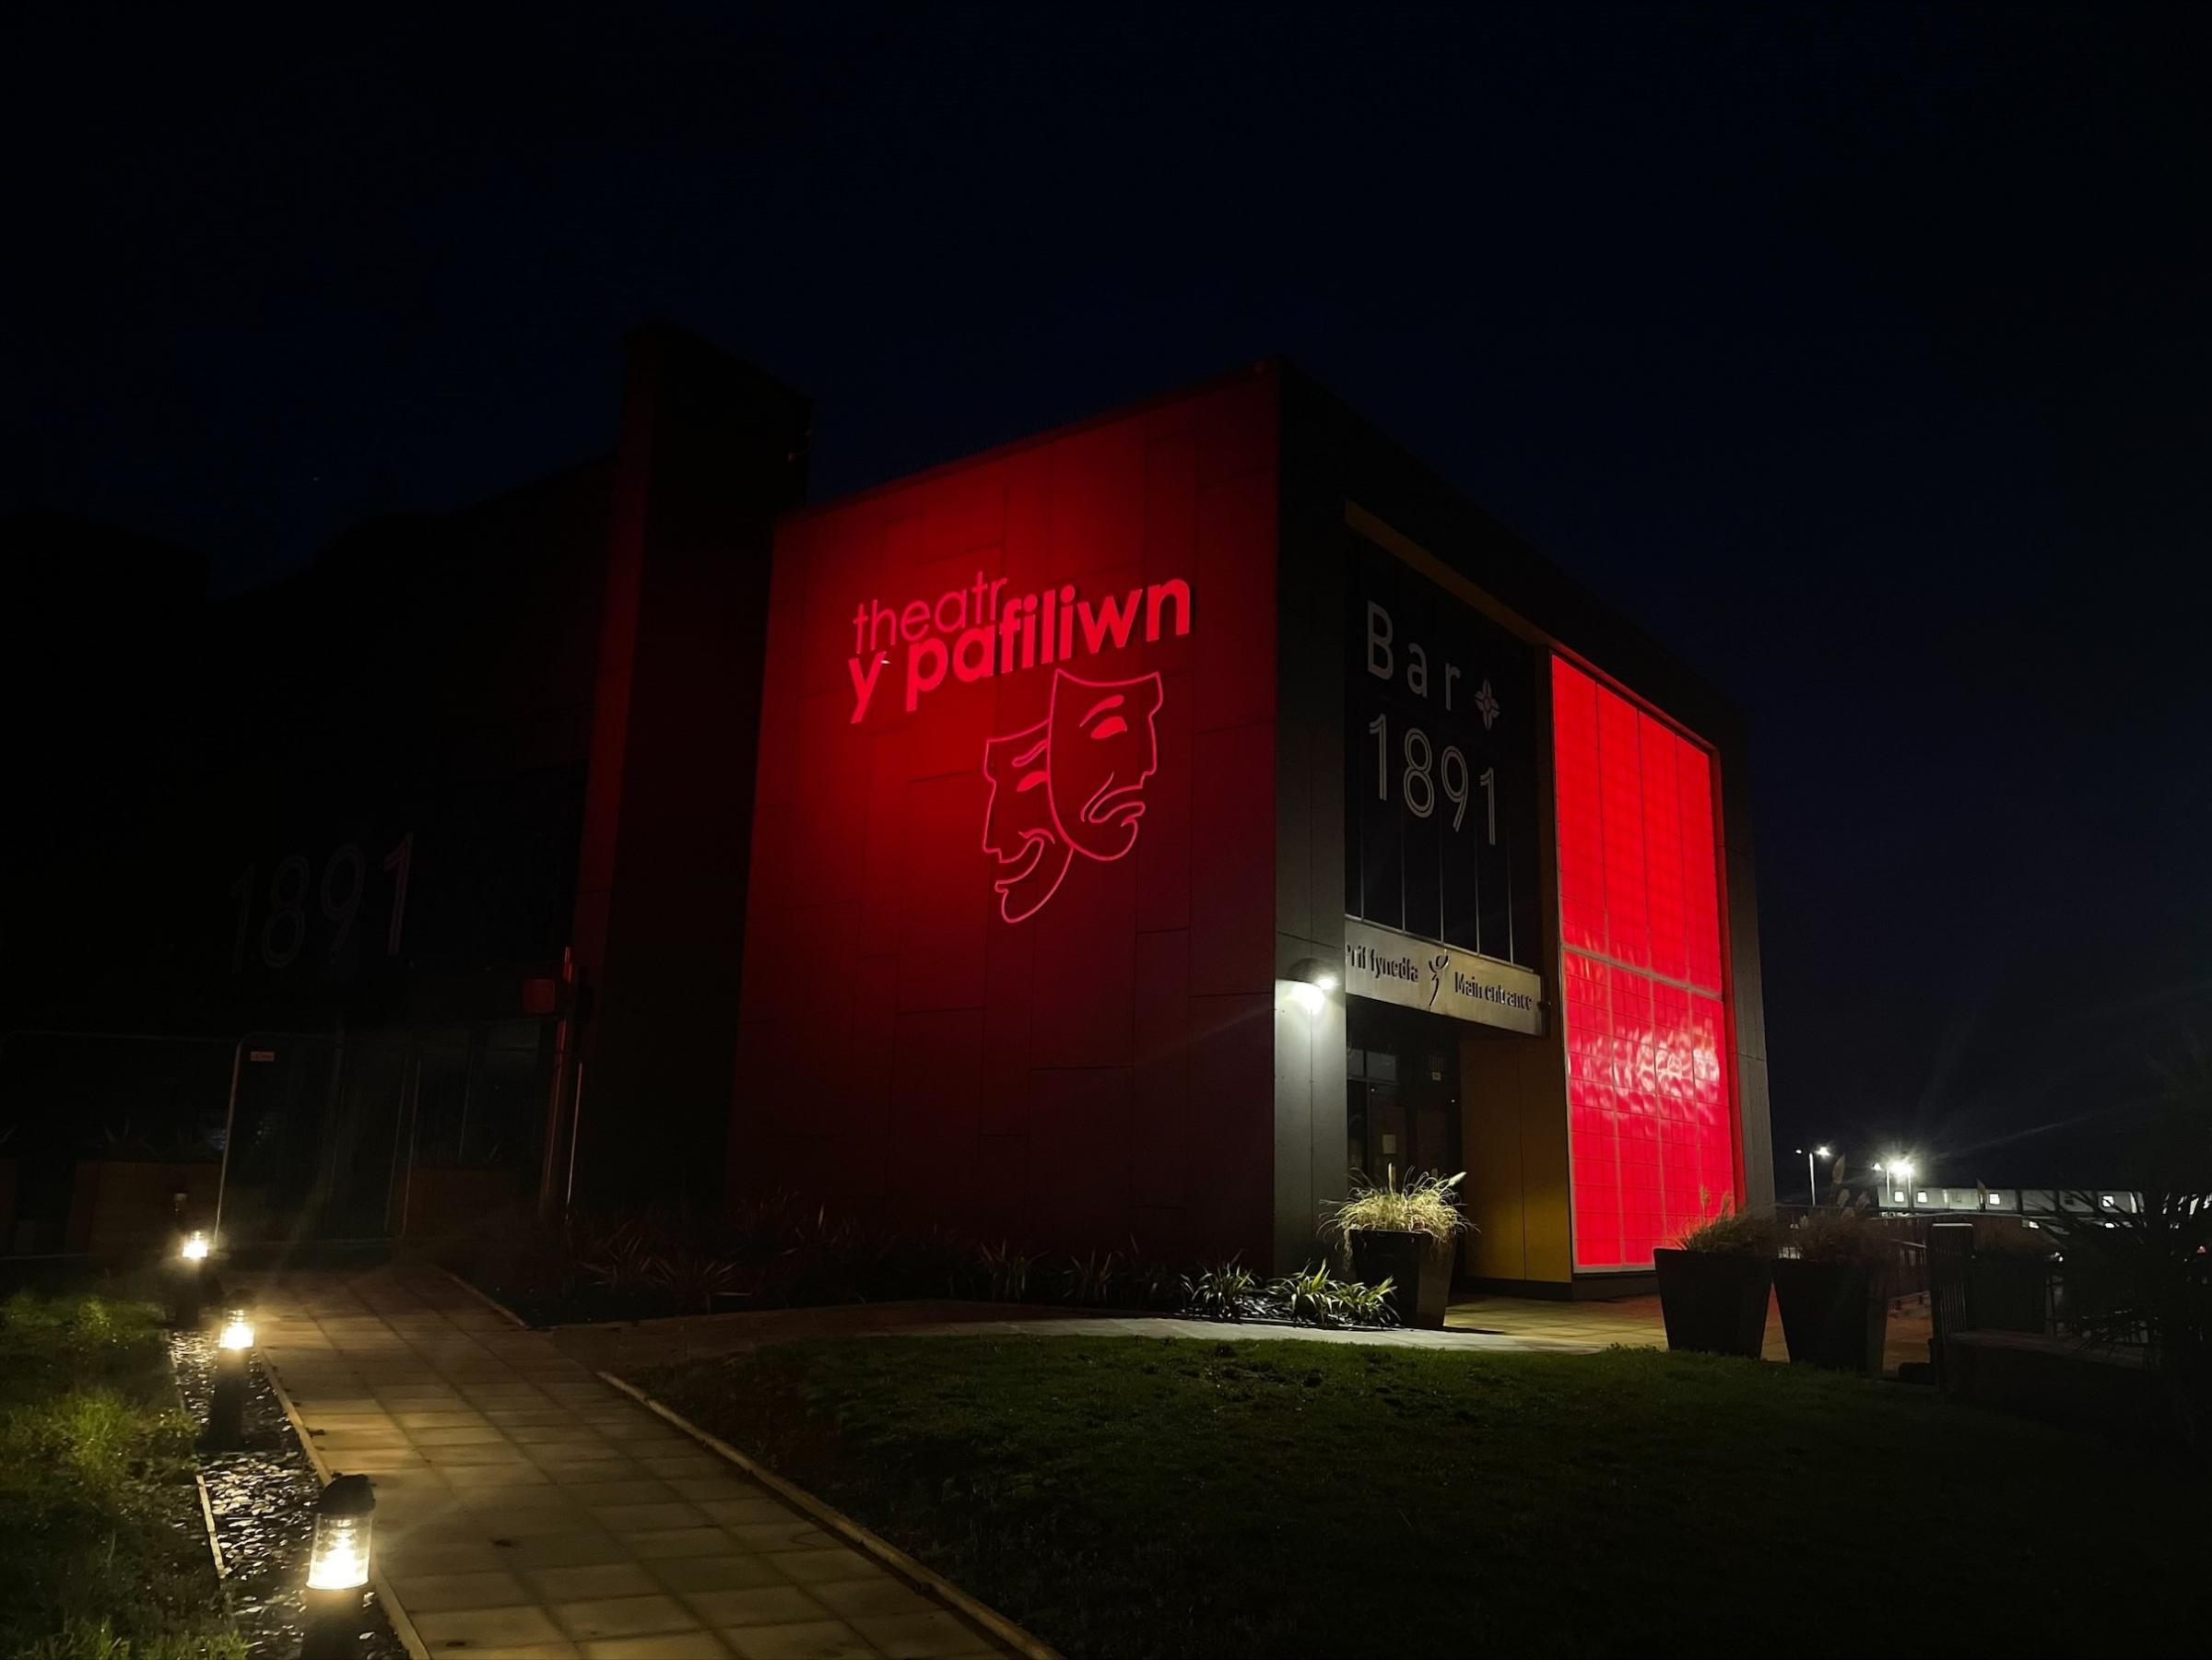 Denbighshire Leisure Ltd are lighting up their buildings in red until November 11